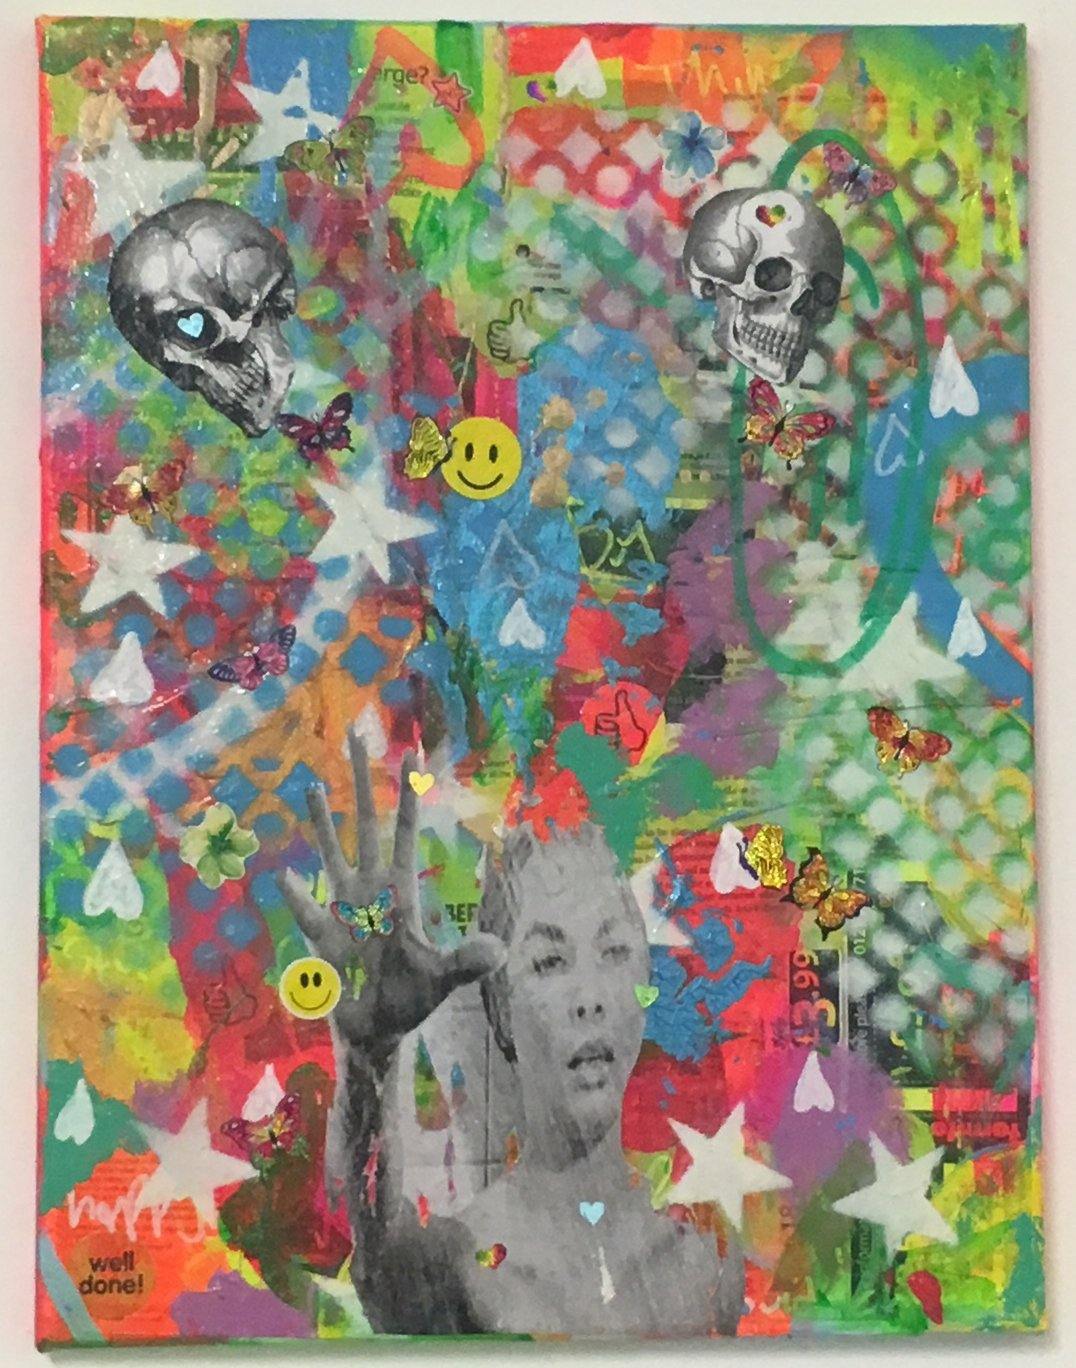 Twist and crawl by Barrie J Davies 2018, mixed media on canvas, 30cm x 40cm, unframed. Barrie J Davies is an Artist - Pop Art and Street art inspired Artist based in Brighton England UK - Pop Art Paintings, Street Art Prints & Editions available 